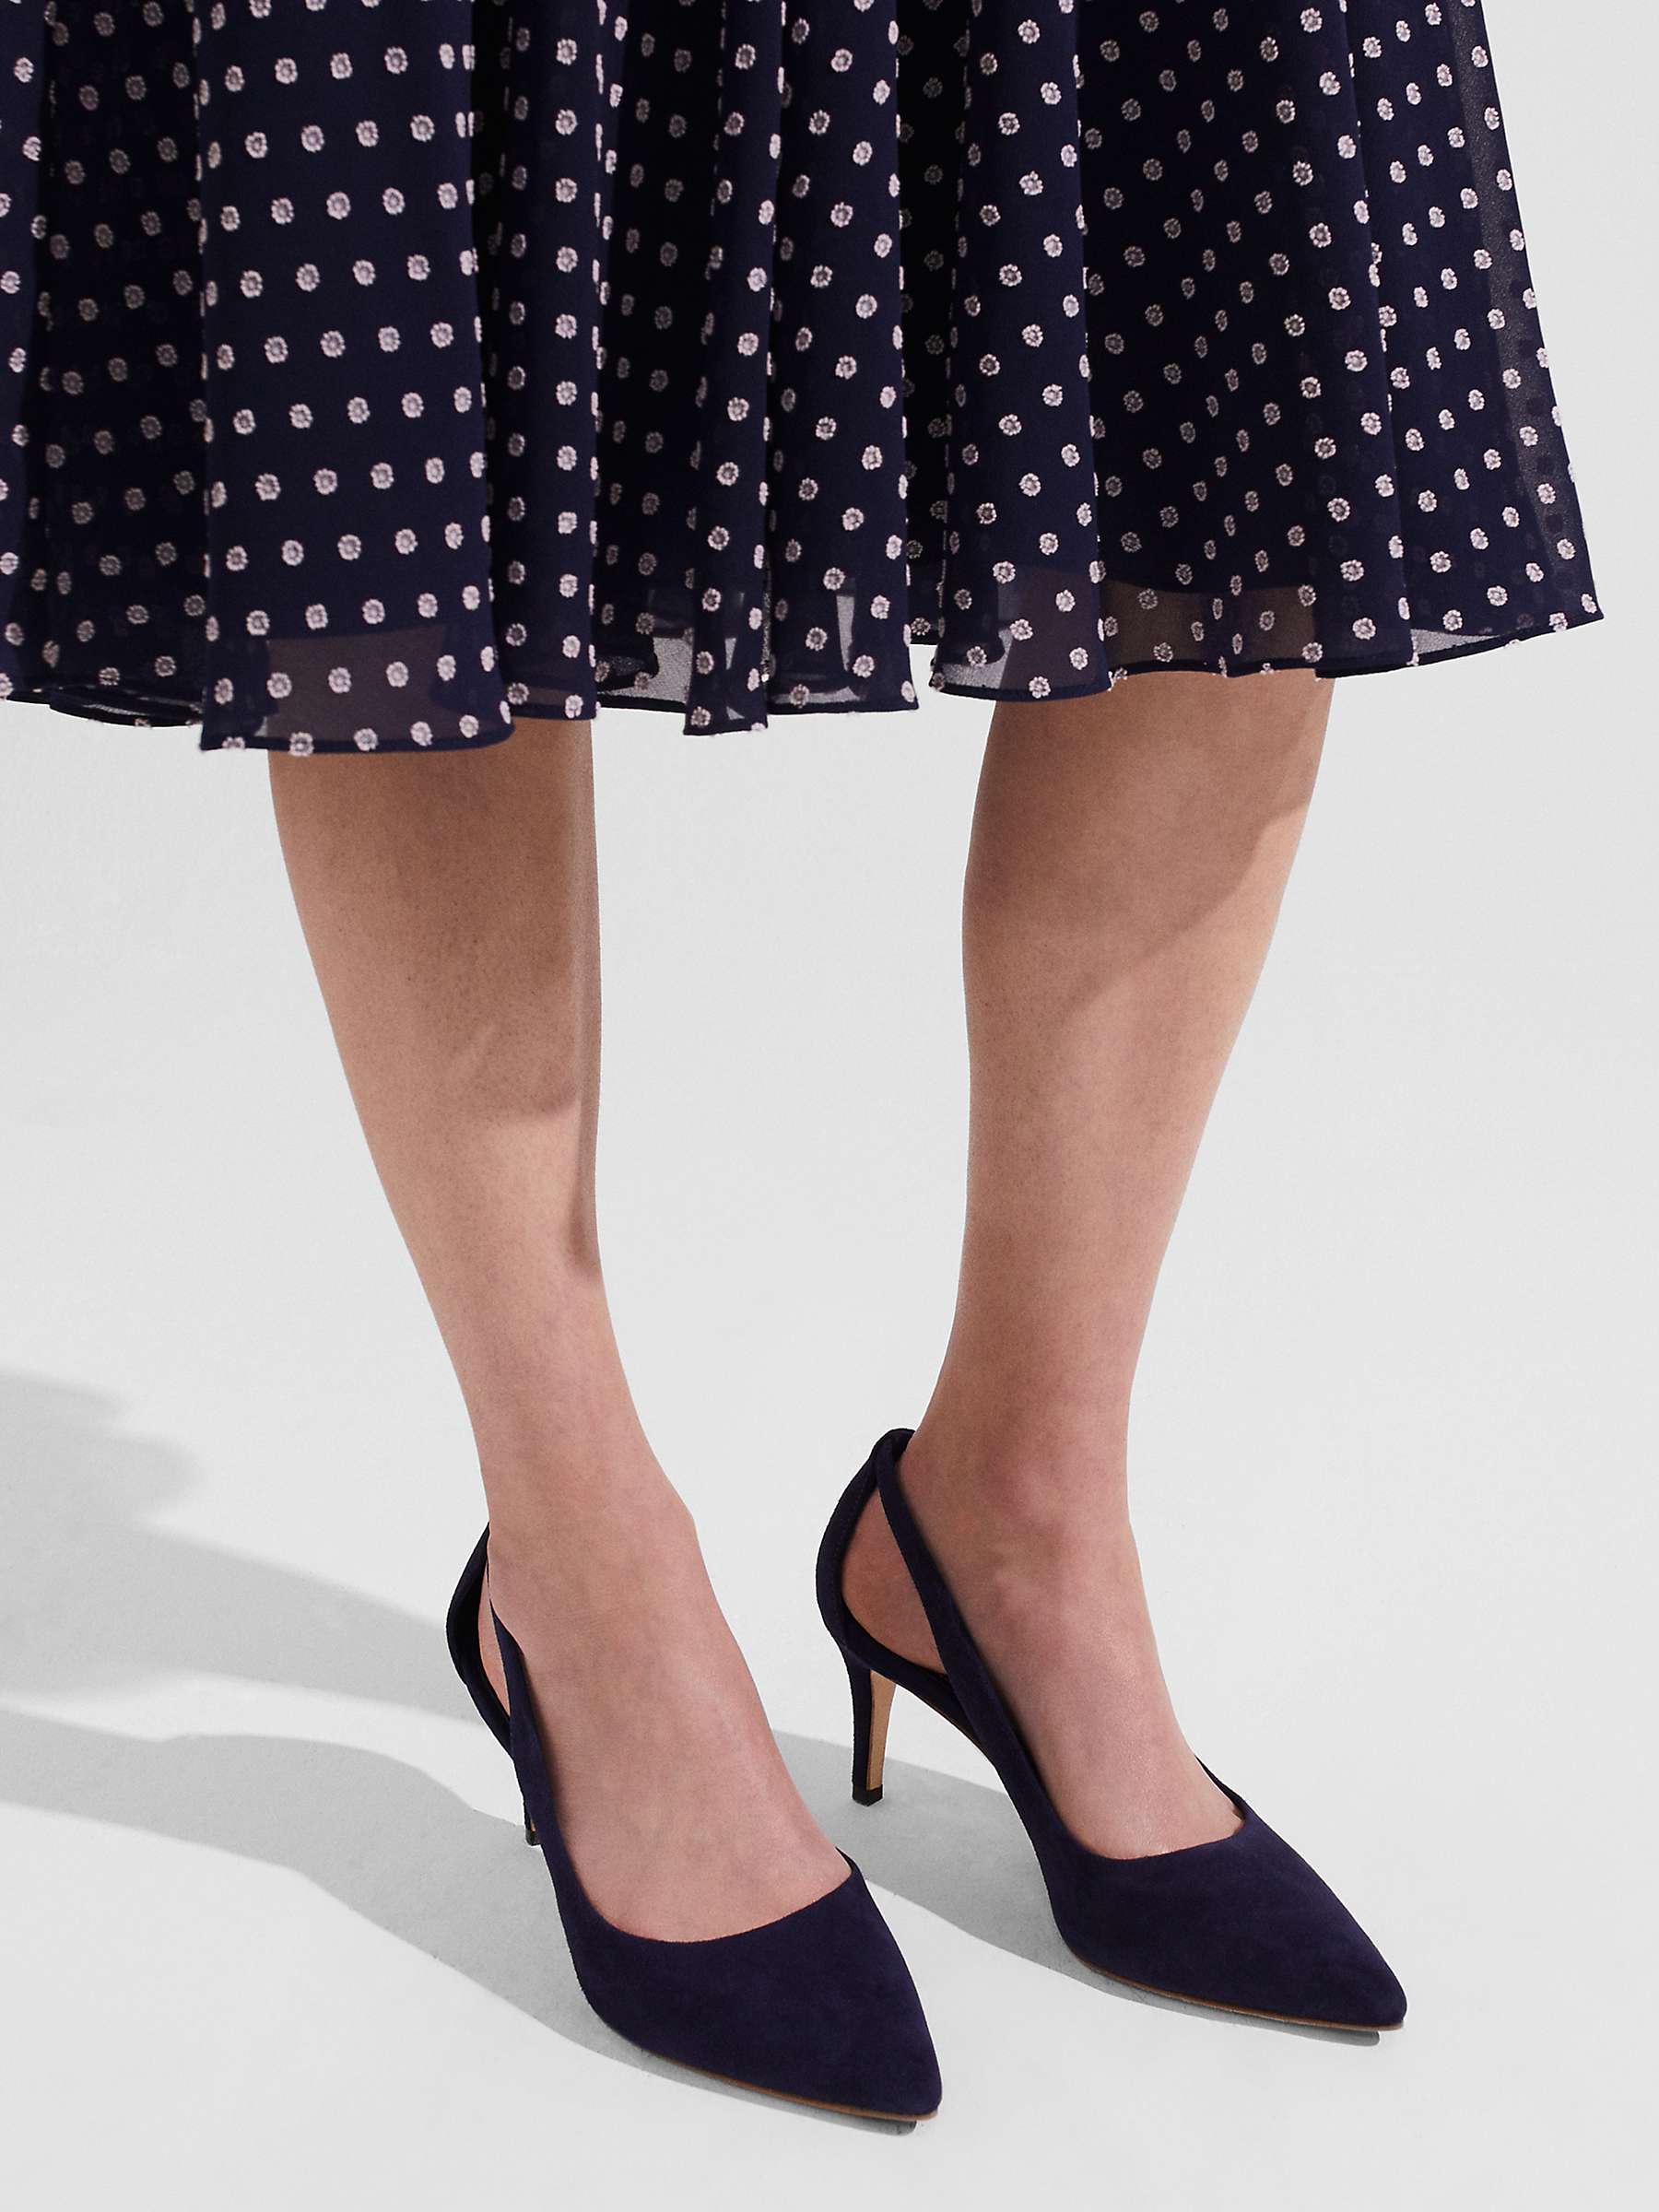 Buy Hobbs Natasha Cut Out Court Shoes Online at johnlewis.com